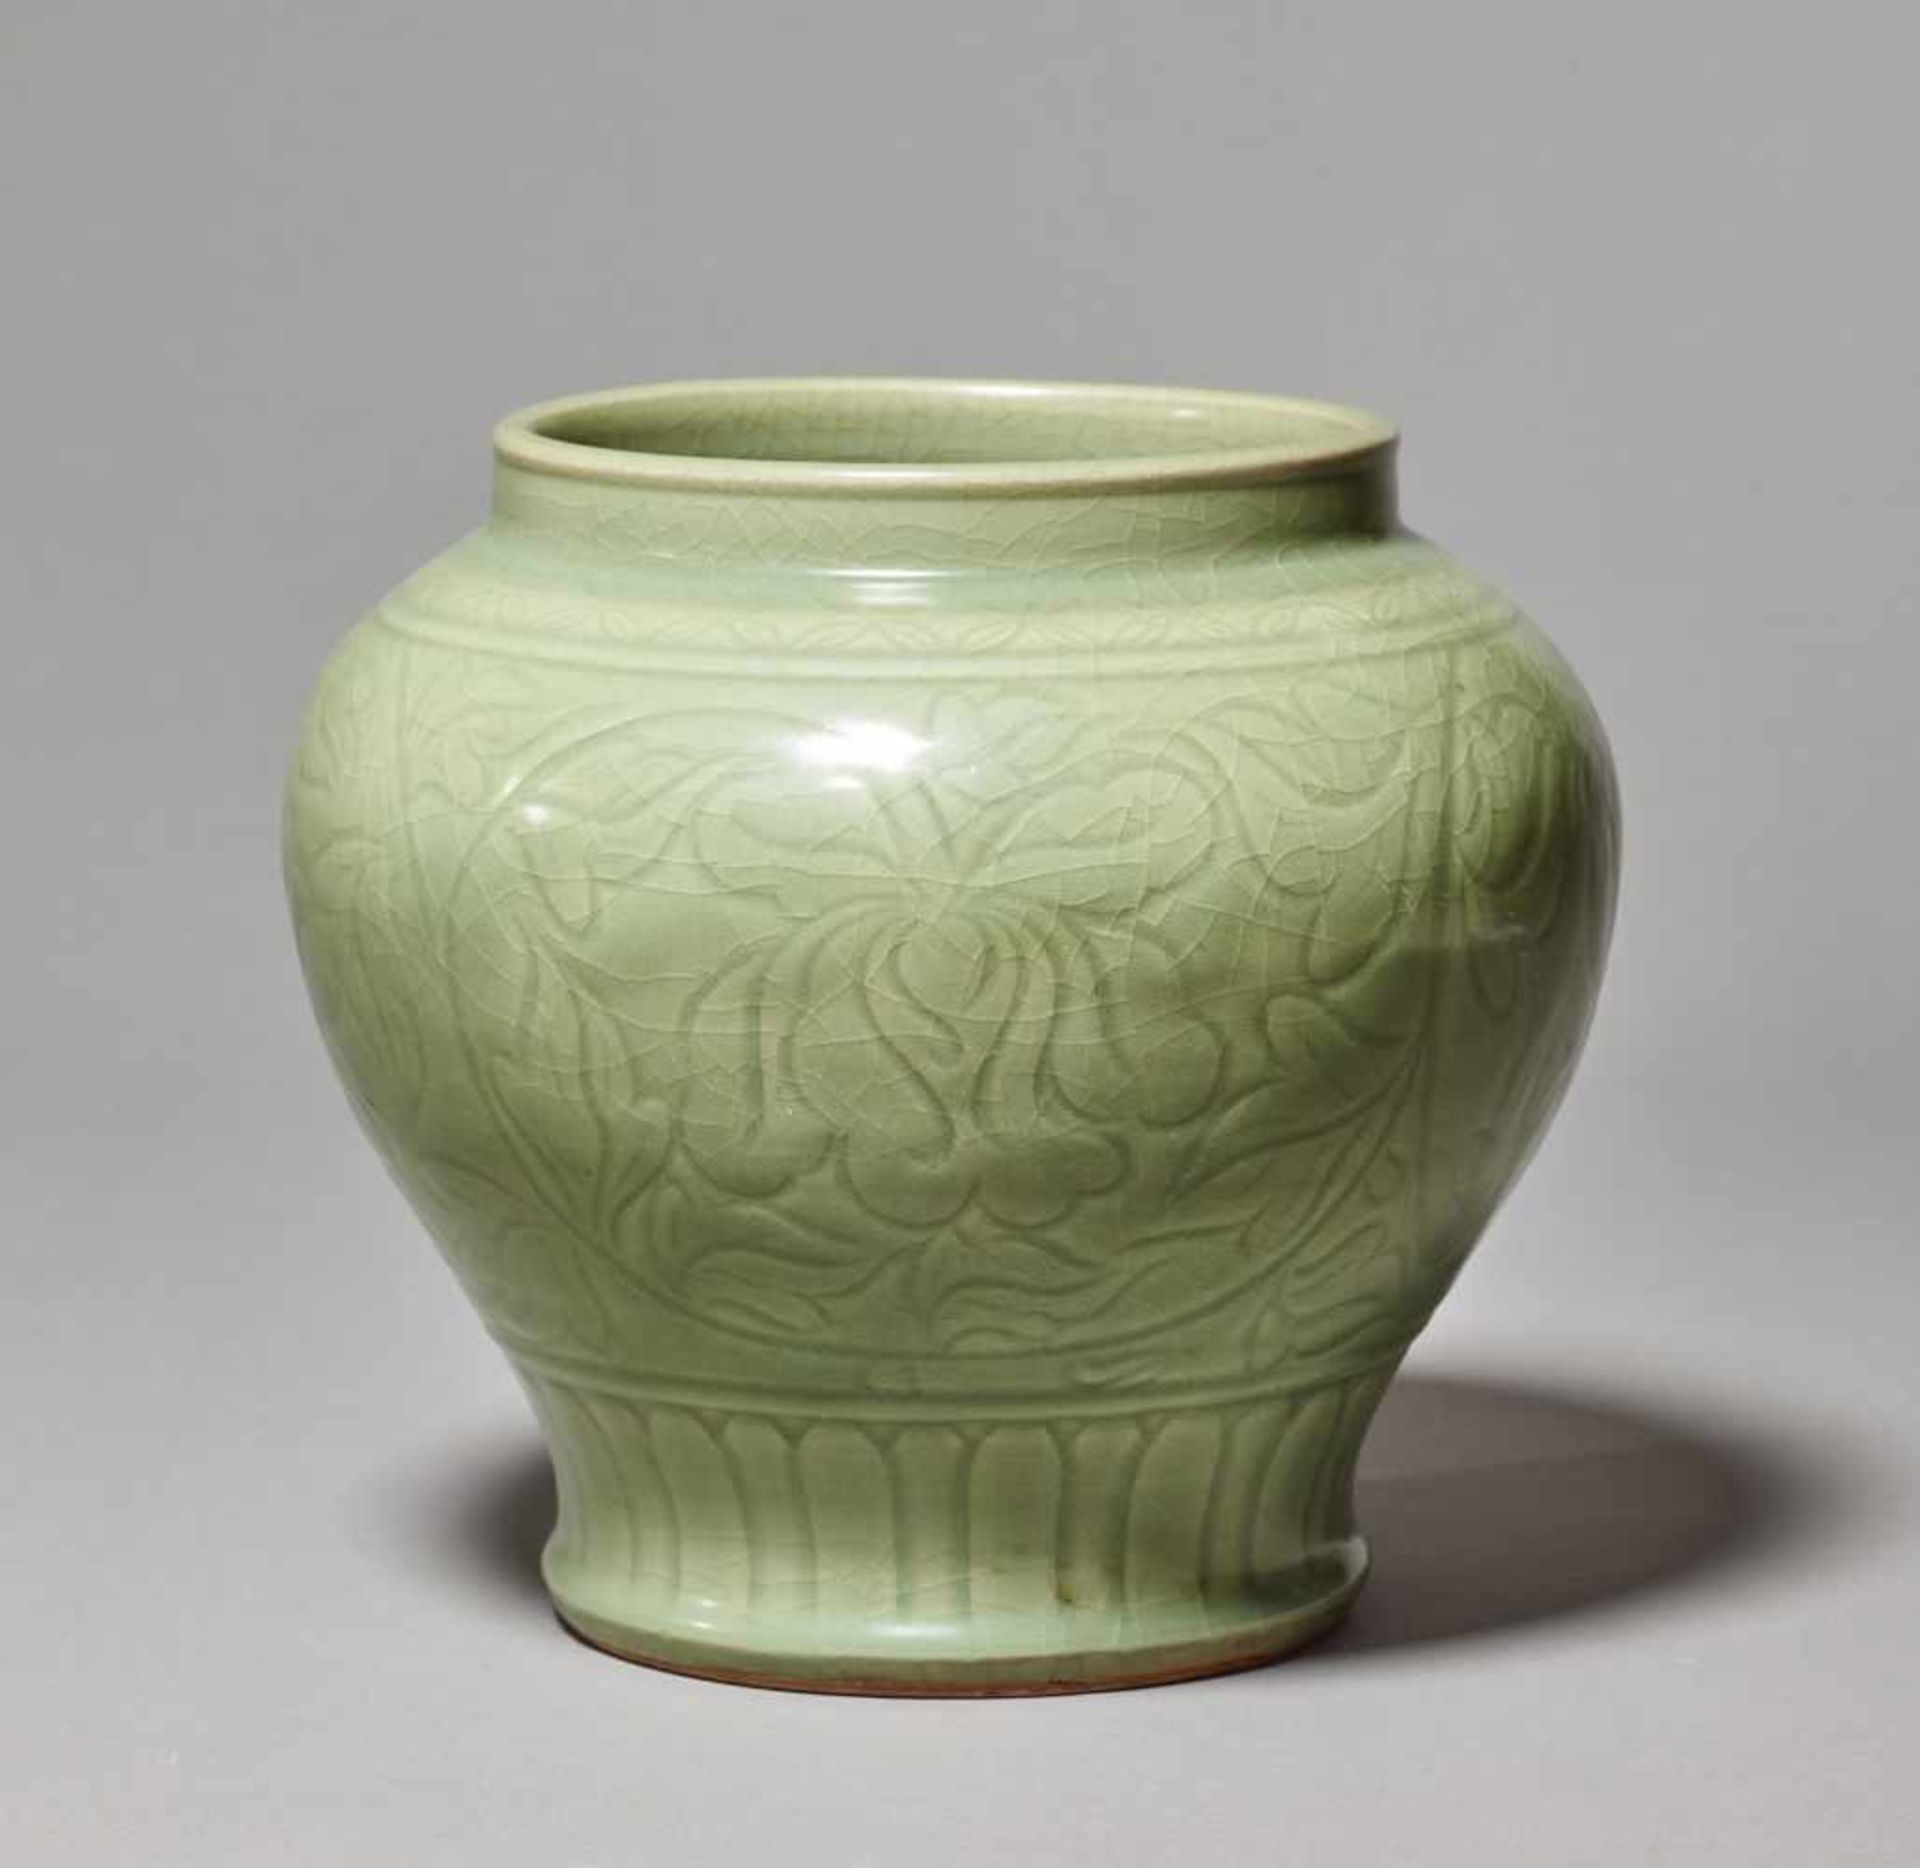 A LONGQUAN CARVED BALUSTER ‘LOTUS’ JAR, MING DYNASTYThe large and massively potted jar entirely - Image 4 of 7